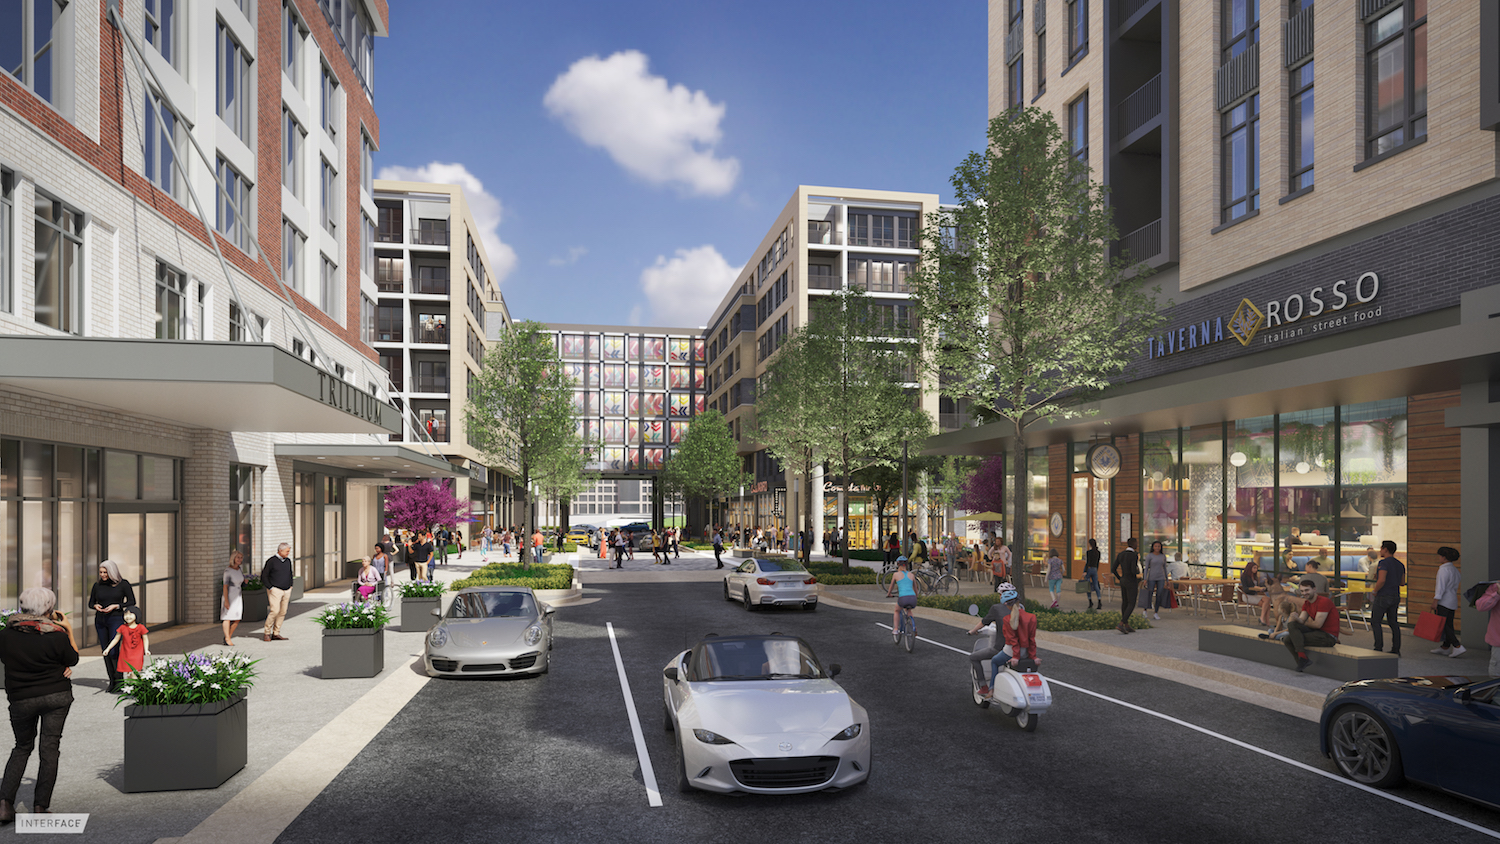 Fairfax County Board Approves “The Boro” for Development at Tysons